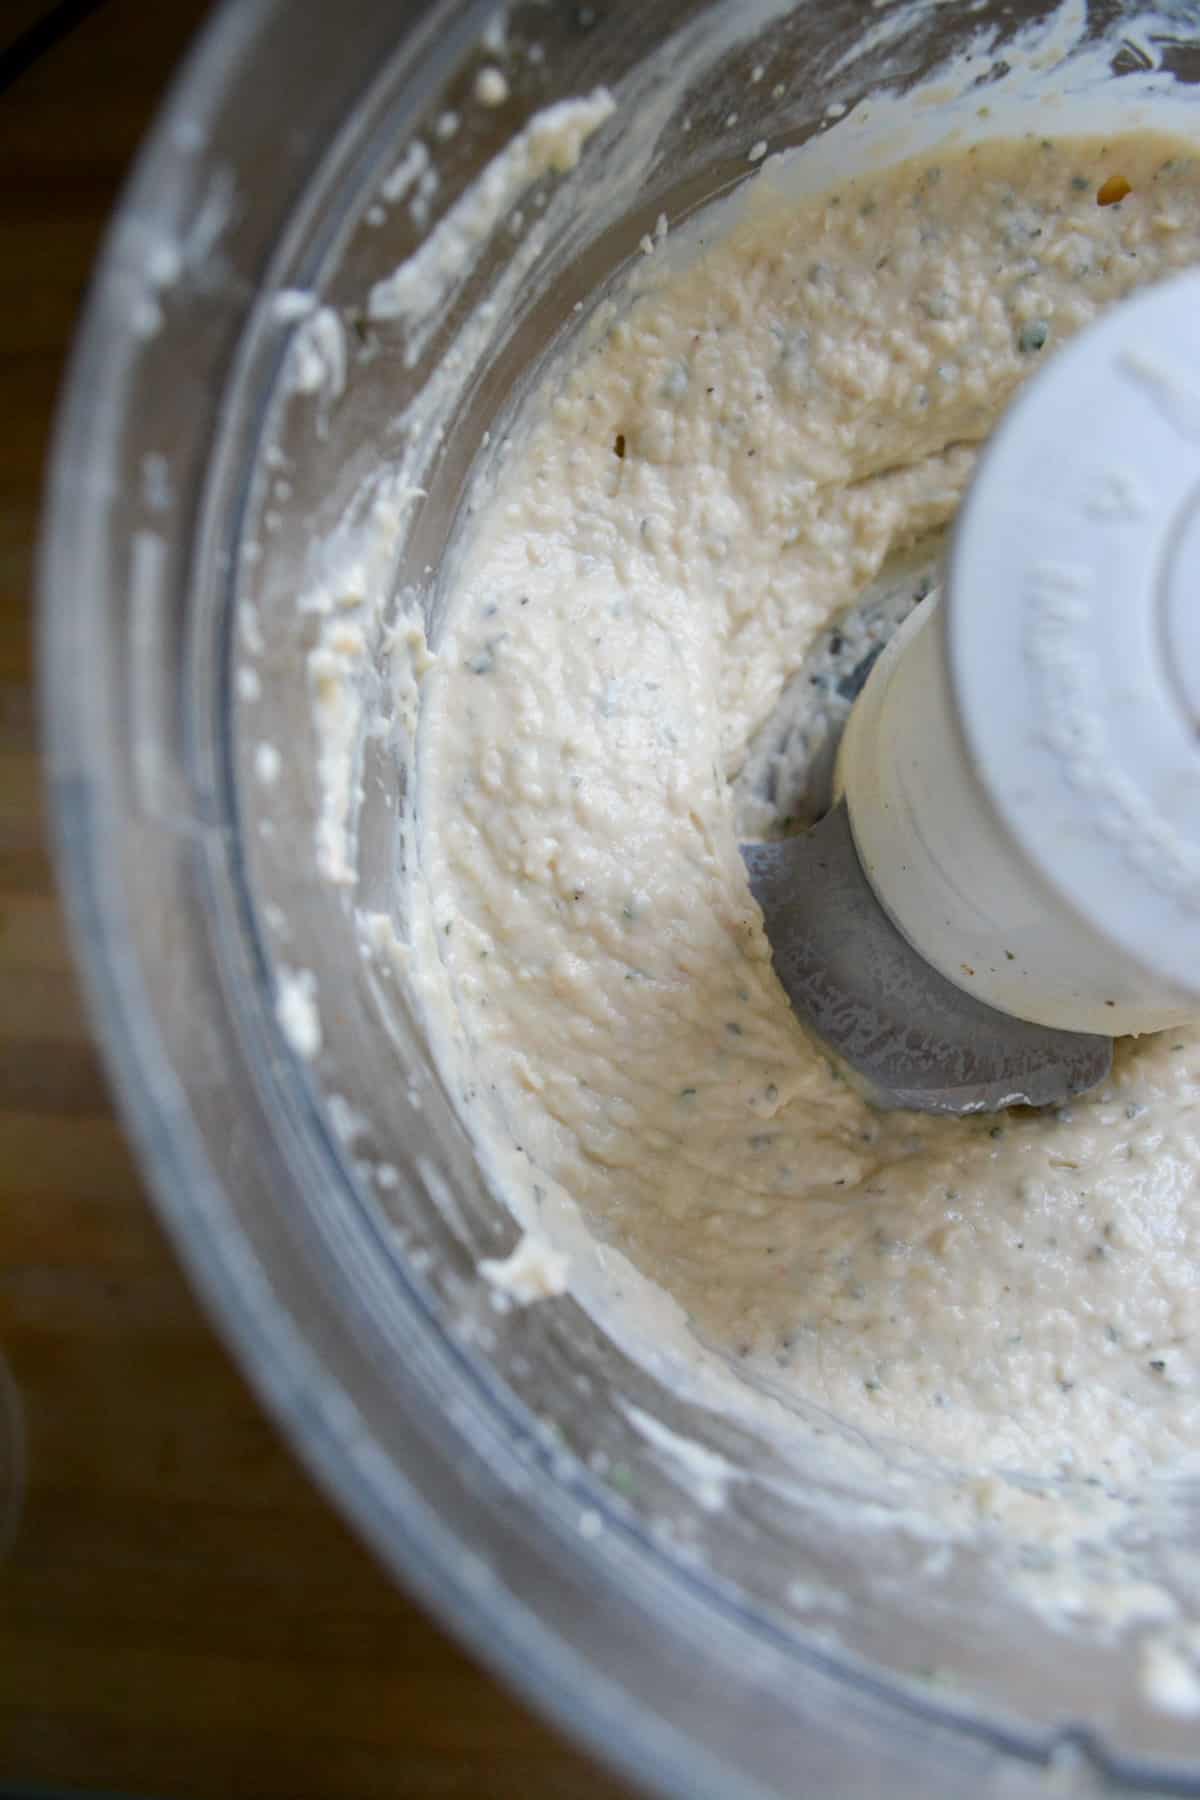 Finished vegan garlic and herb white bean dip in the food processor.